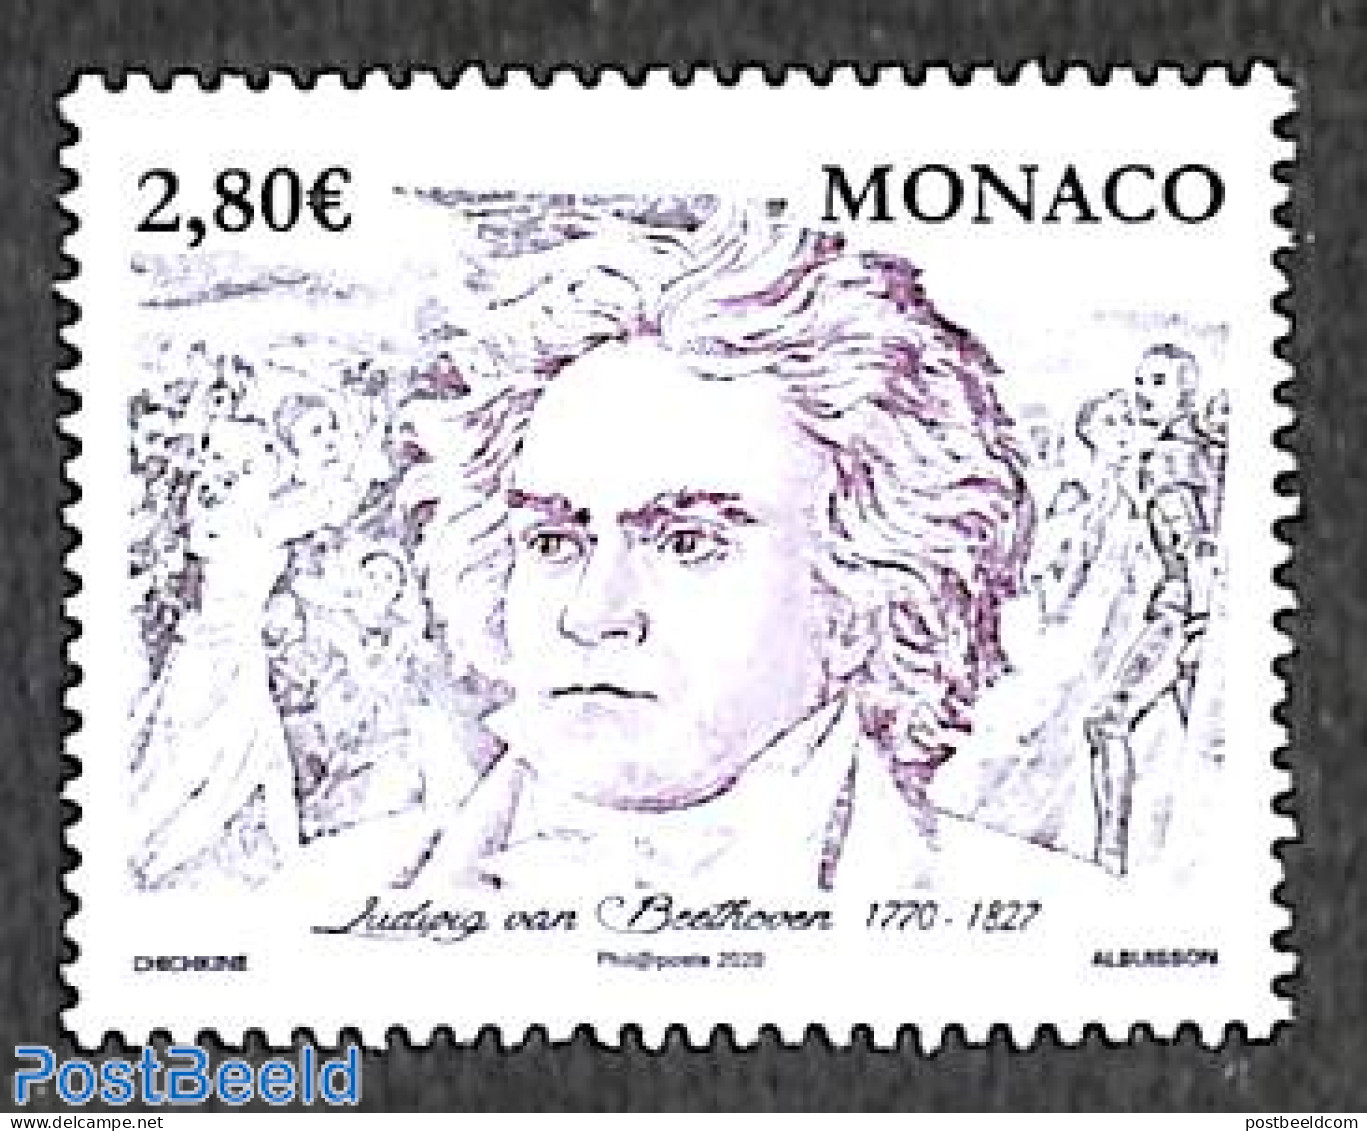 Monaco 2020 Ludwig Von Beethoven 1v, Mint NH, Performance Art - Music - Art - Composers - Unused Stamps